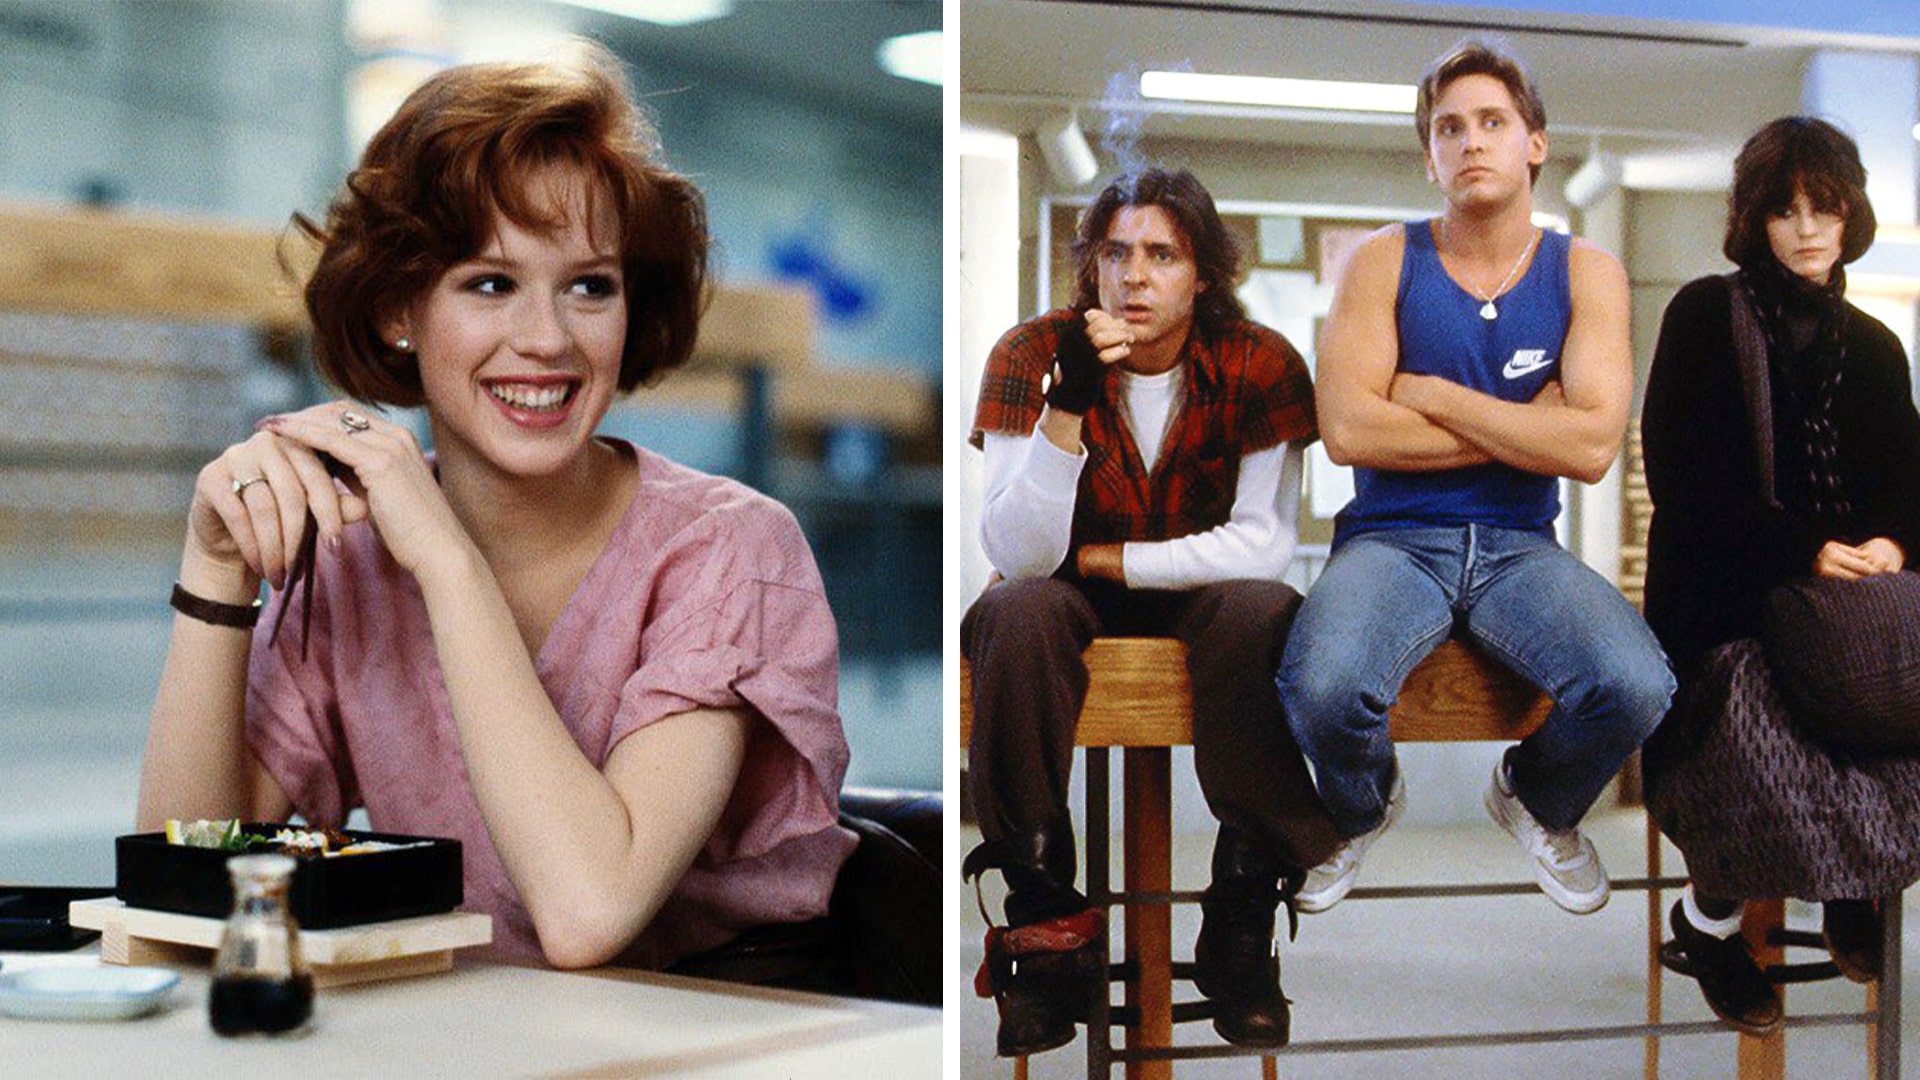 61 The Breakfast Club (1985) Movie Facts You Haven't Read Before